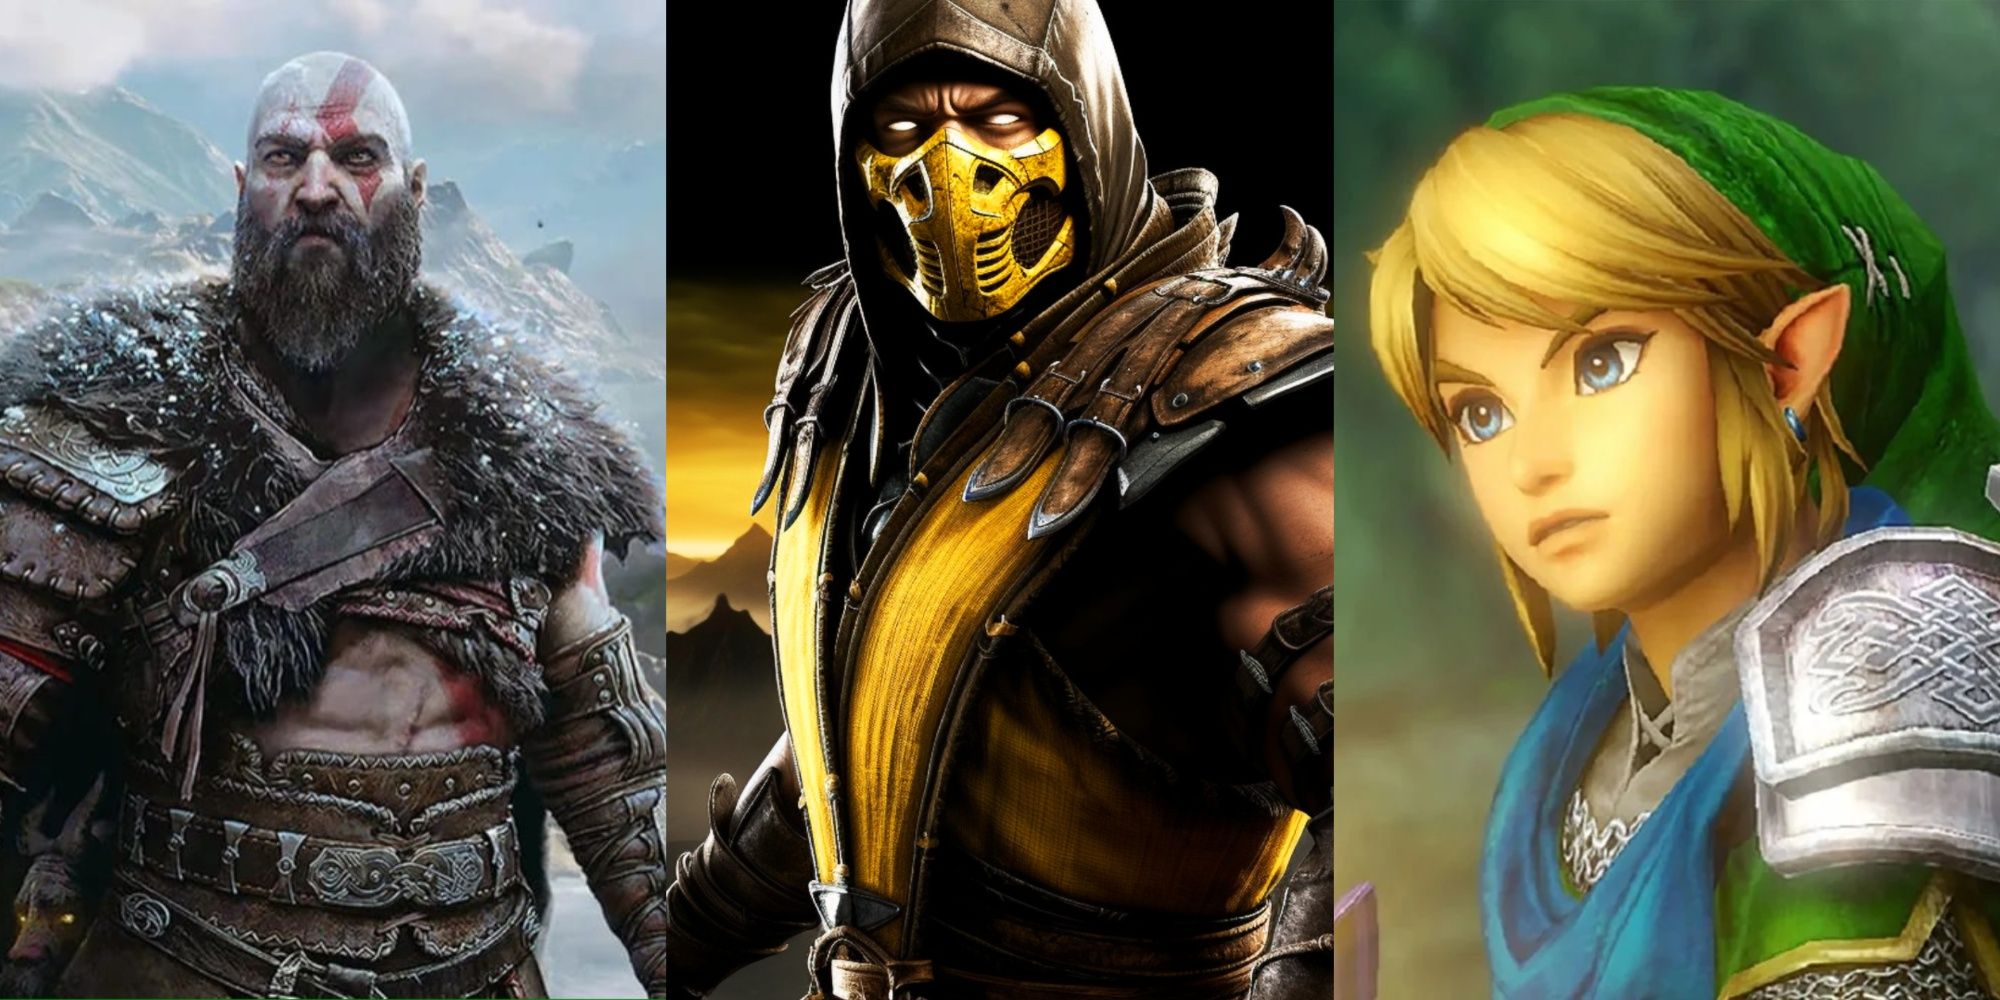 Kratos in front of mountains, Scorpion shrouded in darkness, and Link